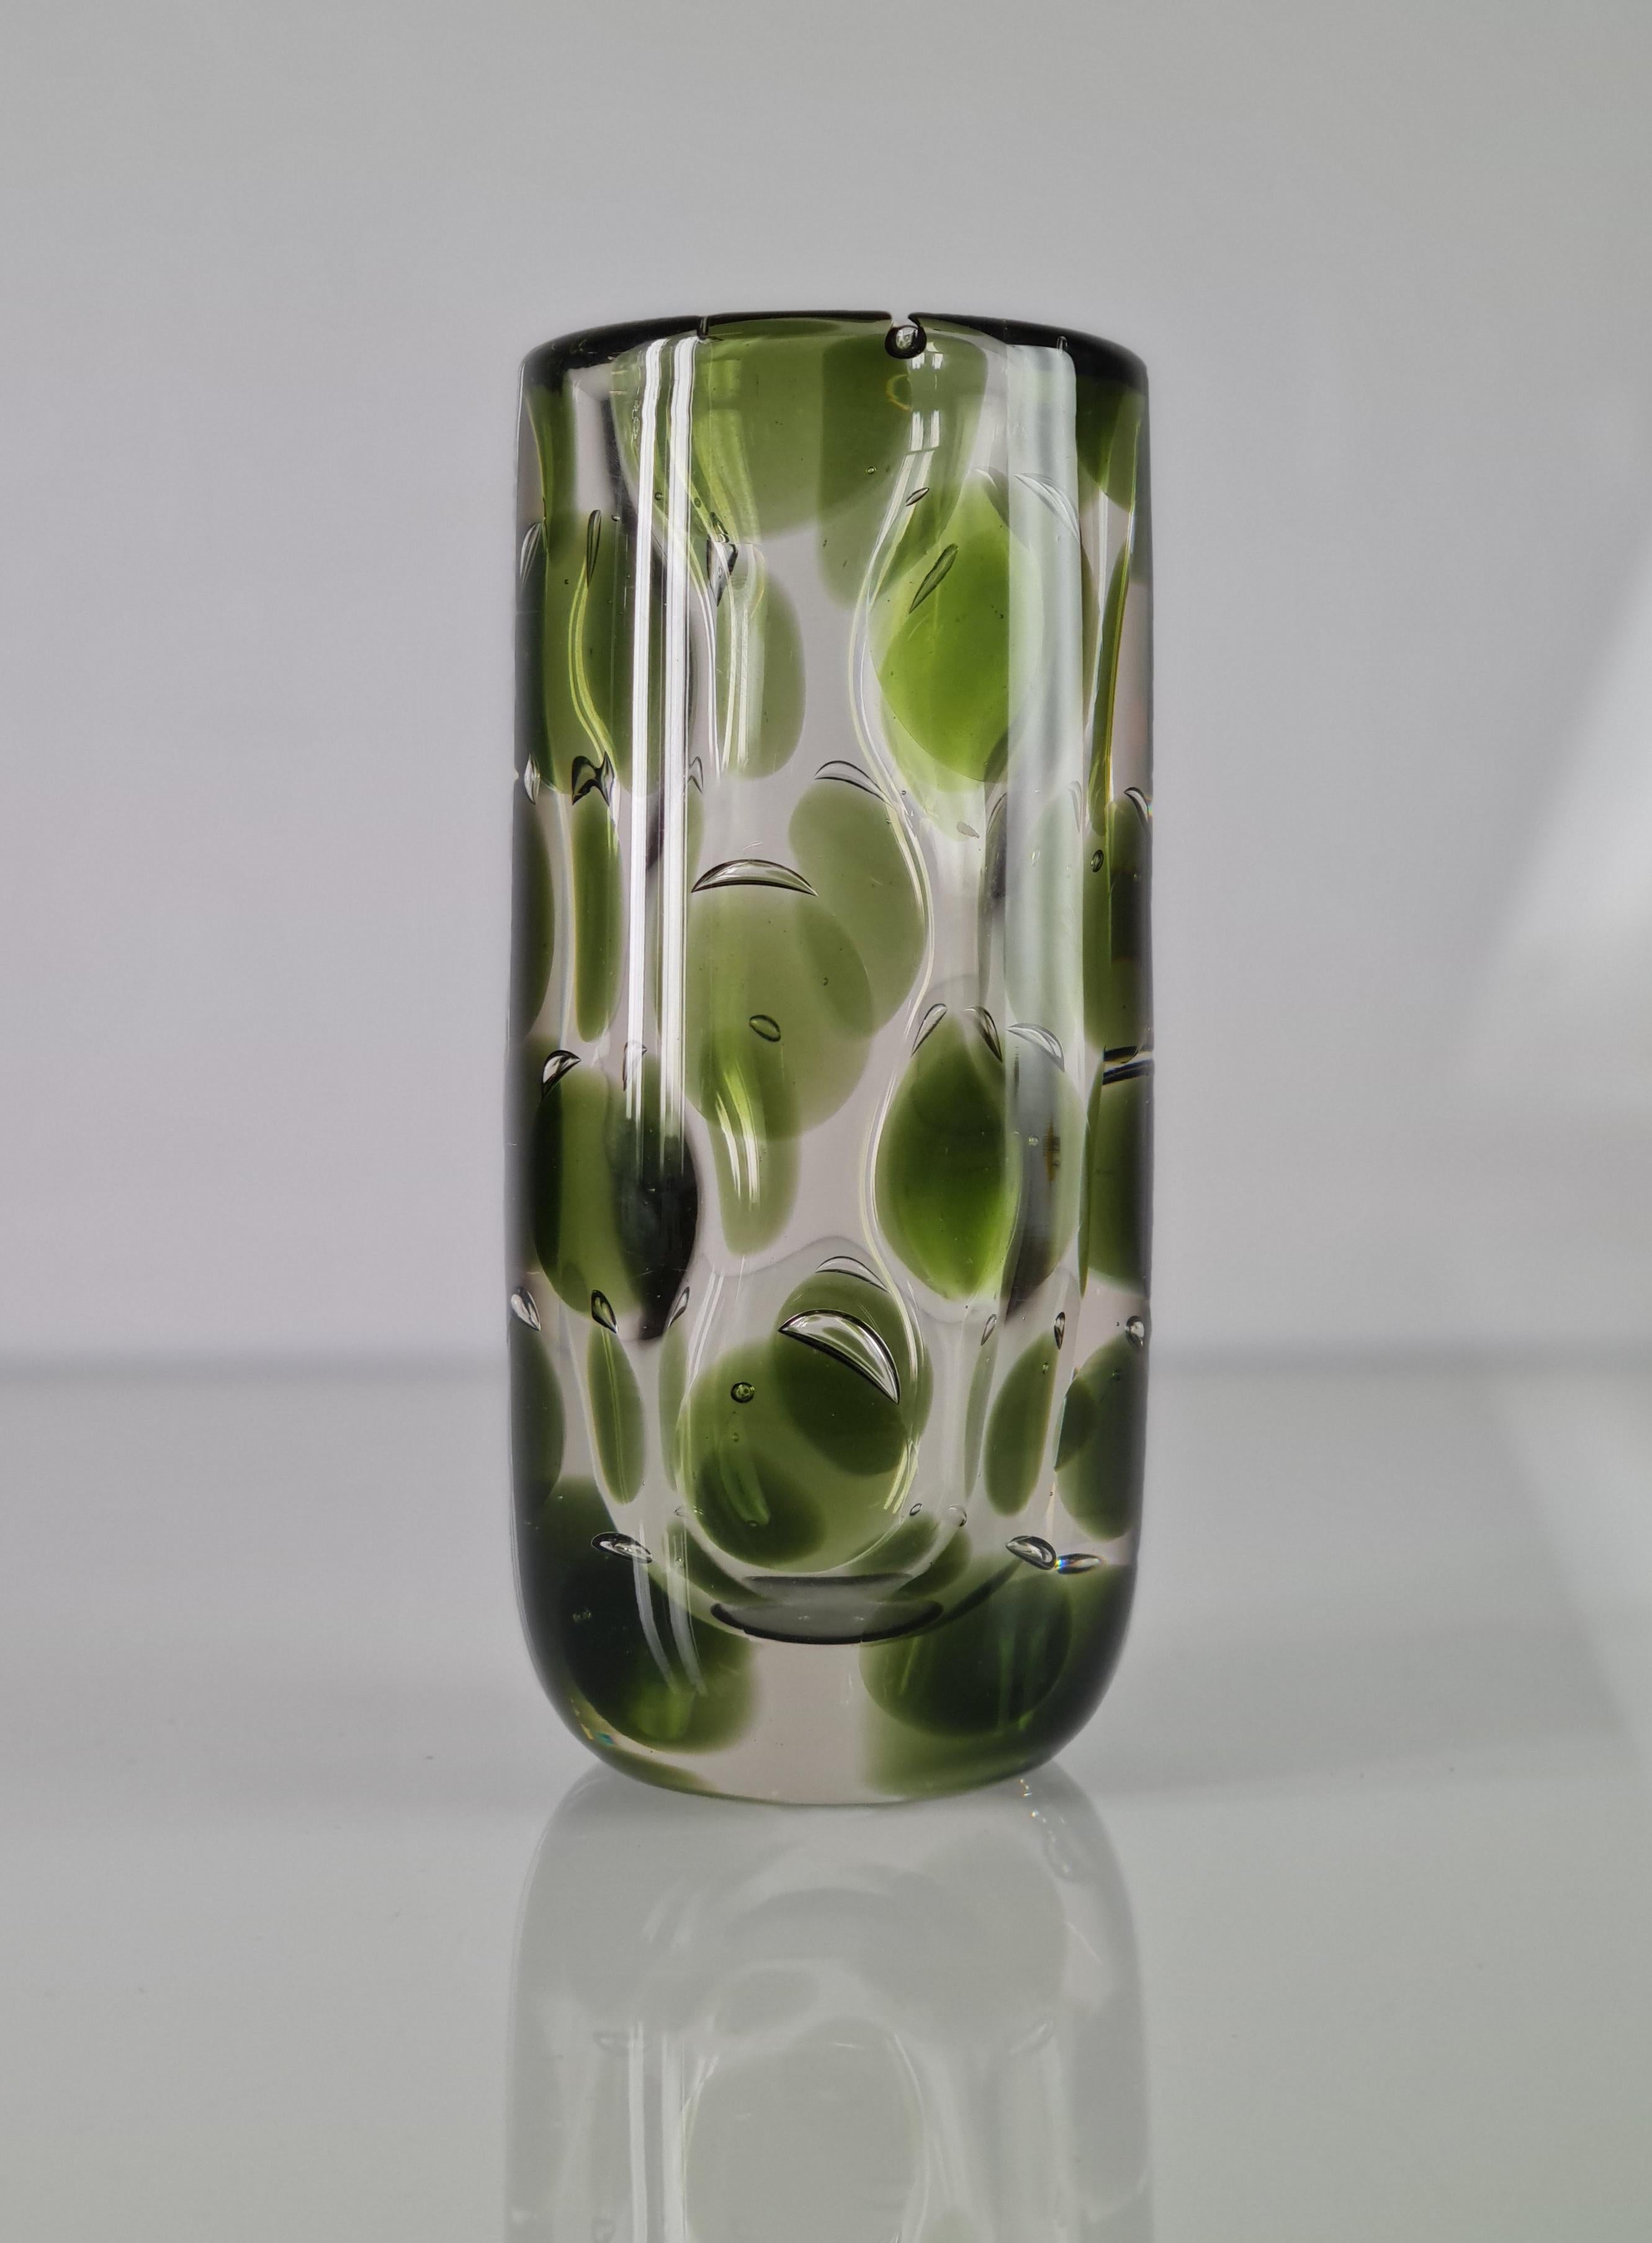 An eye-catching transparent art glass vase with green spots through out the object, imitating a panther. Designed by one of the leading names in the glass scene of her time in Finland, Saara Hopea. Saara always had a unique approach to her many